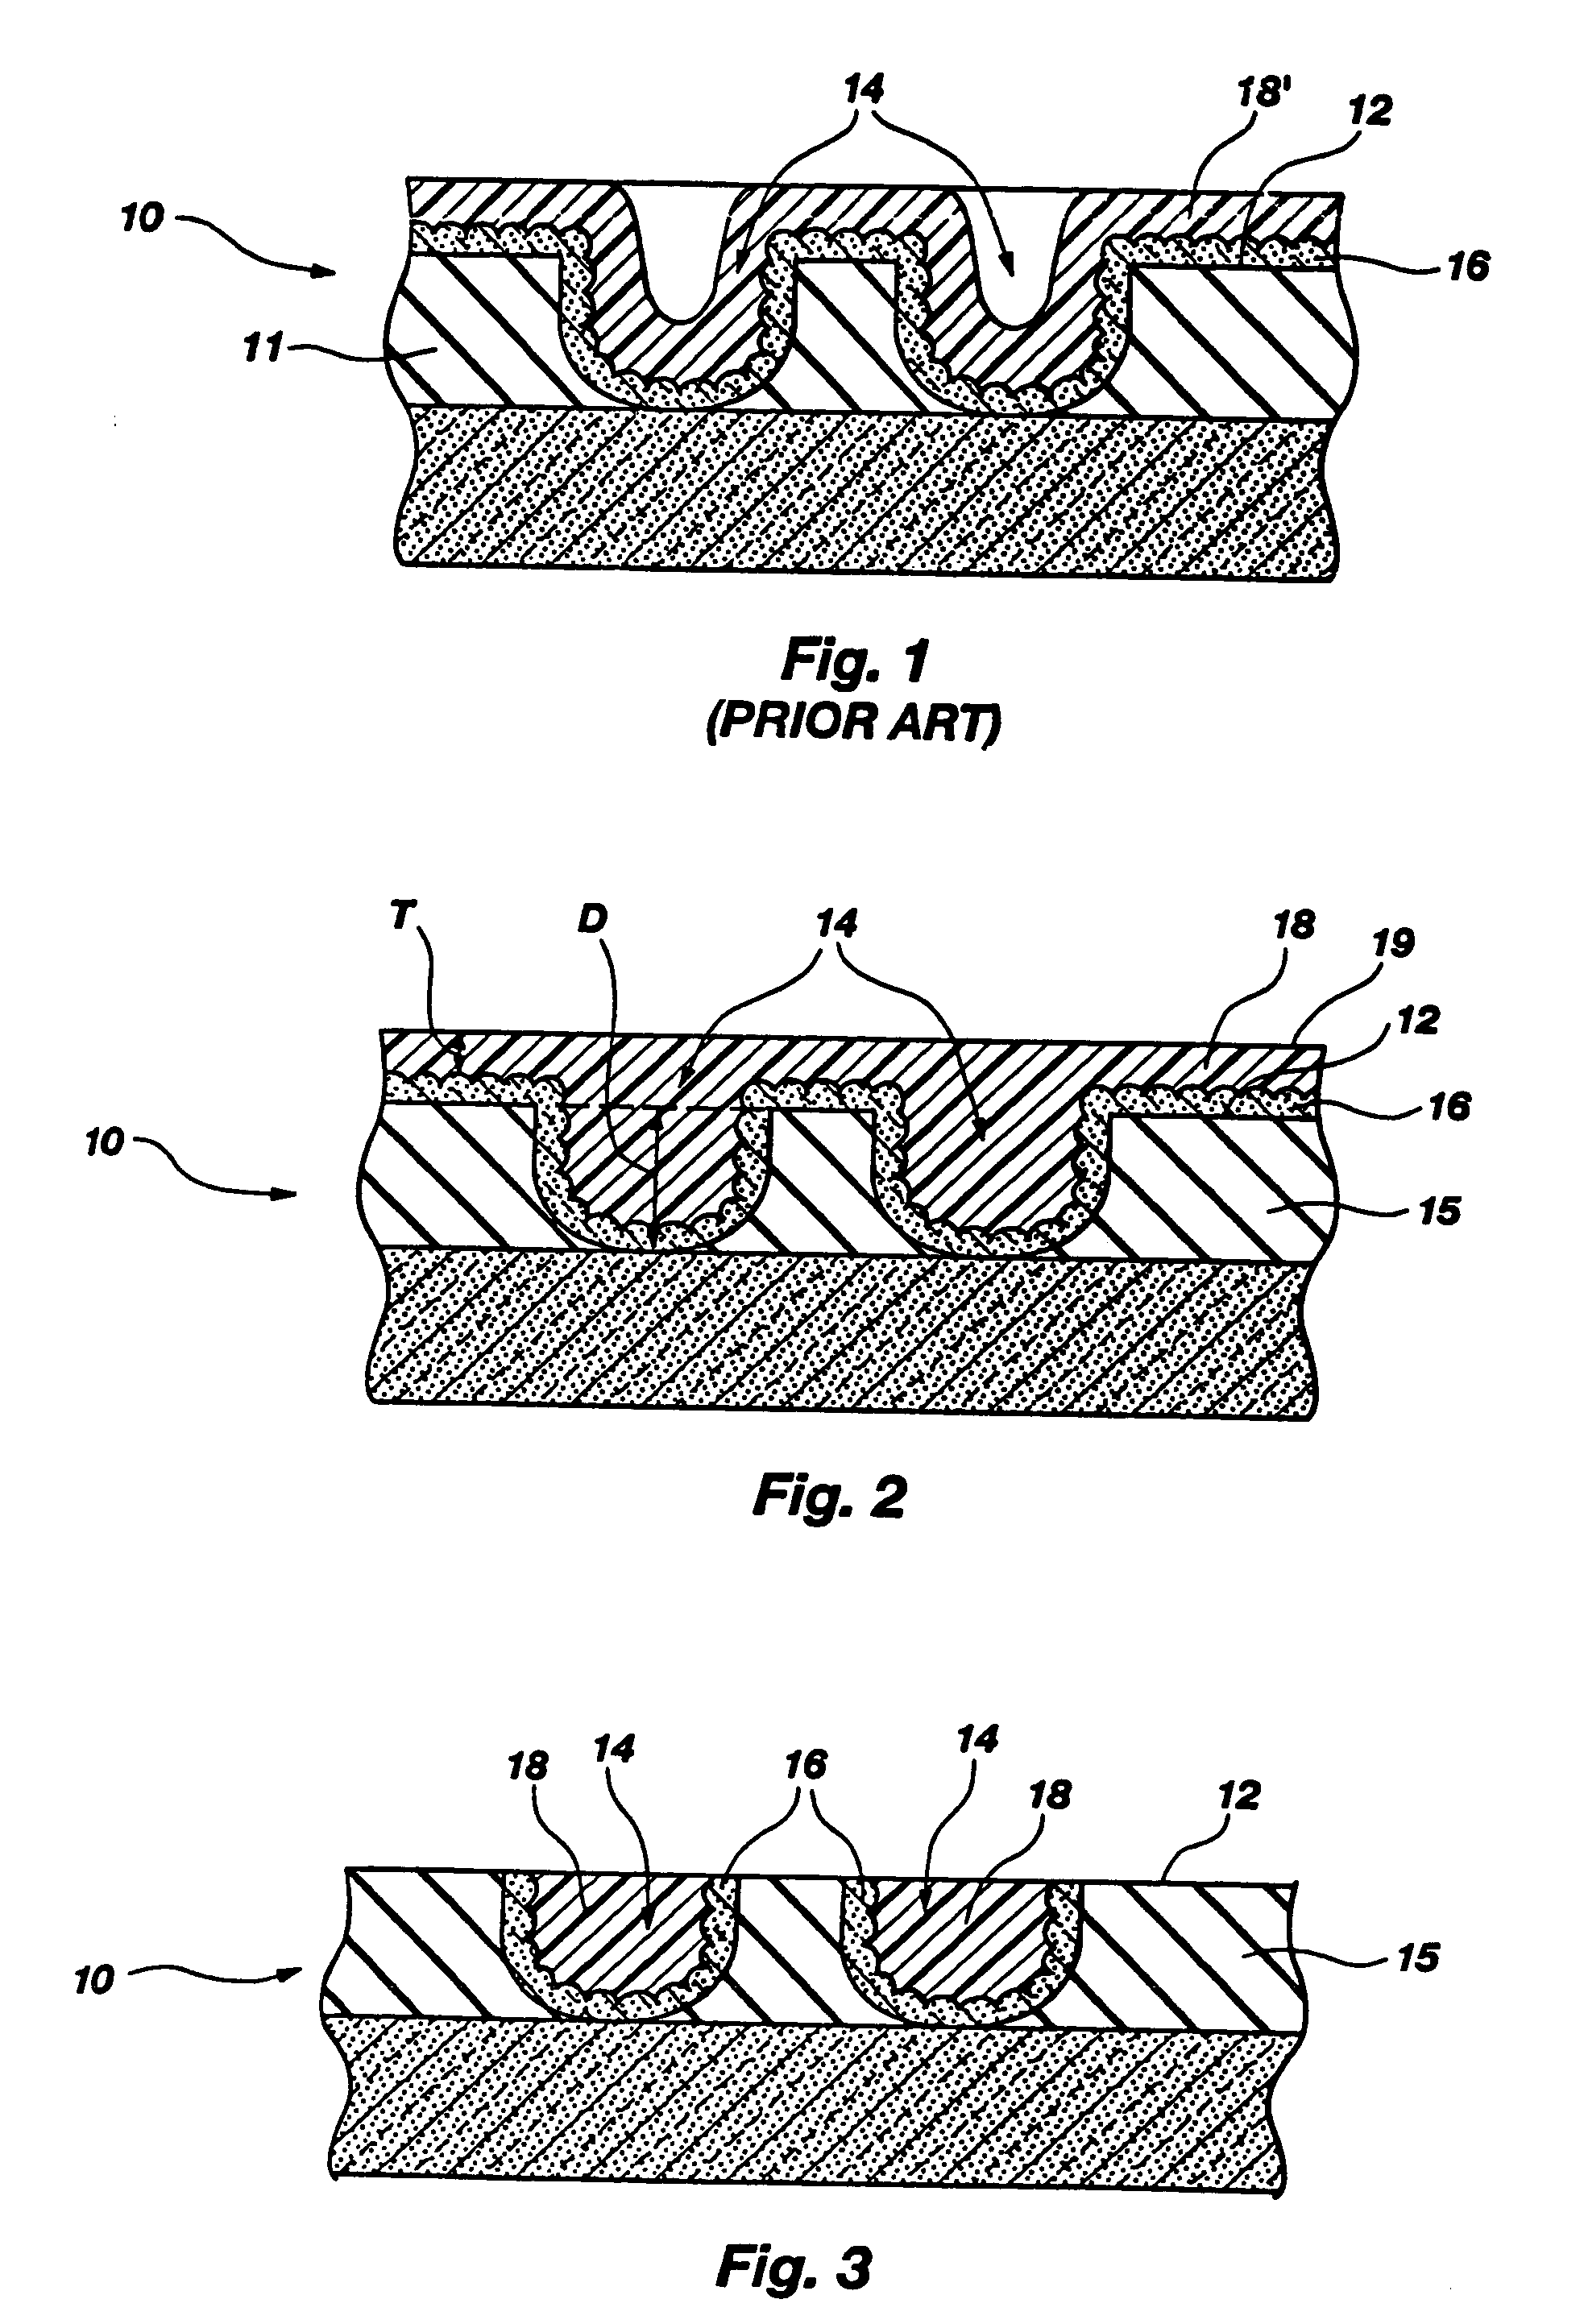 Semiconductor device fabrication methods employing substantially planar buffer material layers to improve the planarity of subsequent planarazation processes